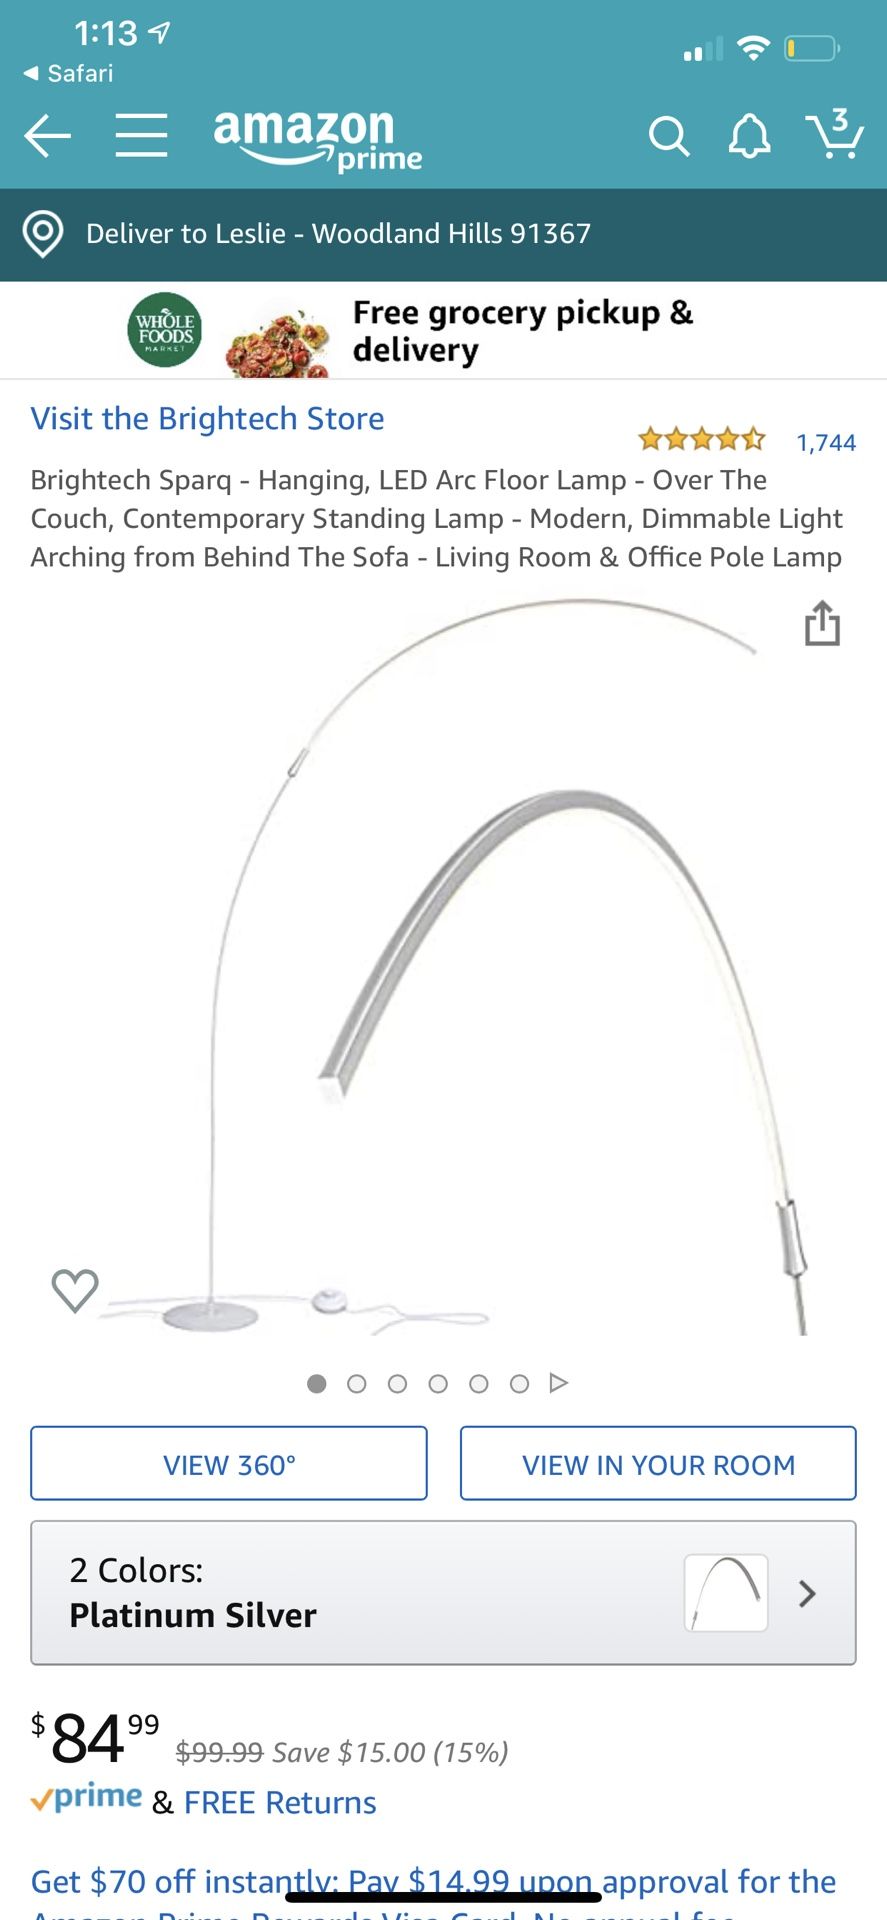 Brightech Sparq - Hanging, LED Arc Floor Lamp - Over The Couch, Contemporary Standing Lamp - Modern, Dimmable Light Arching from Behind The Sofa - Li